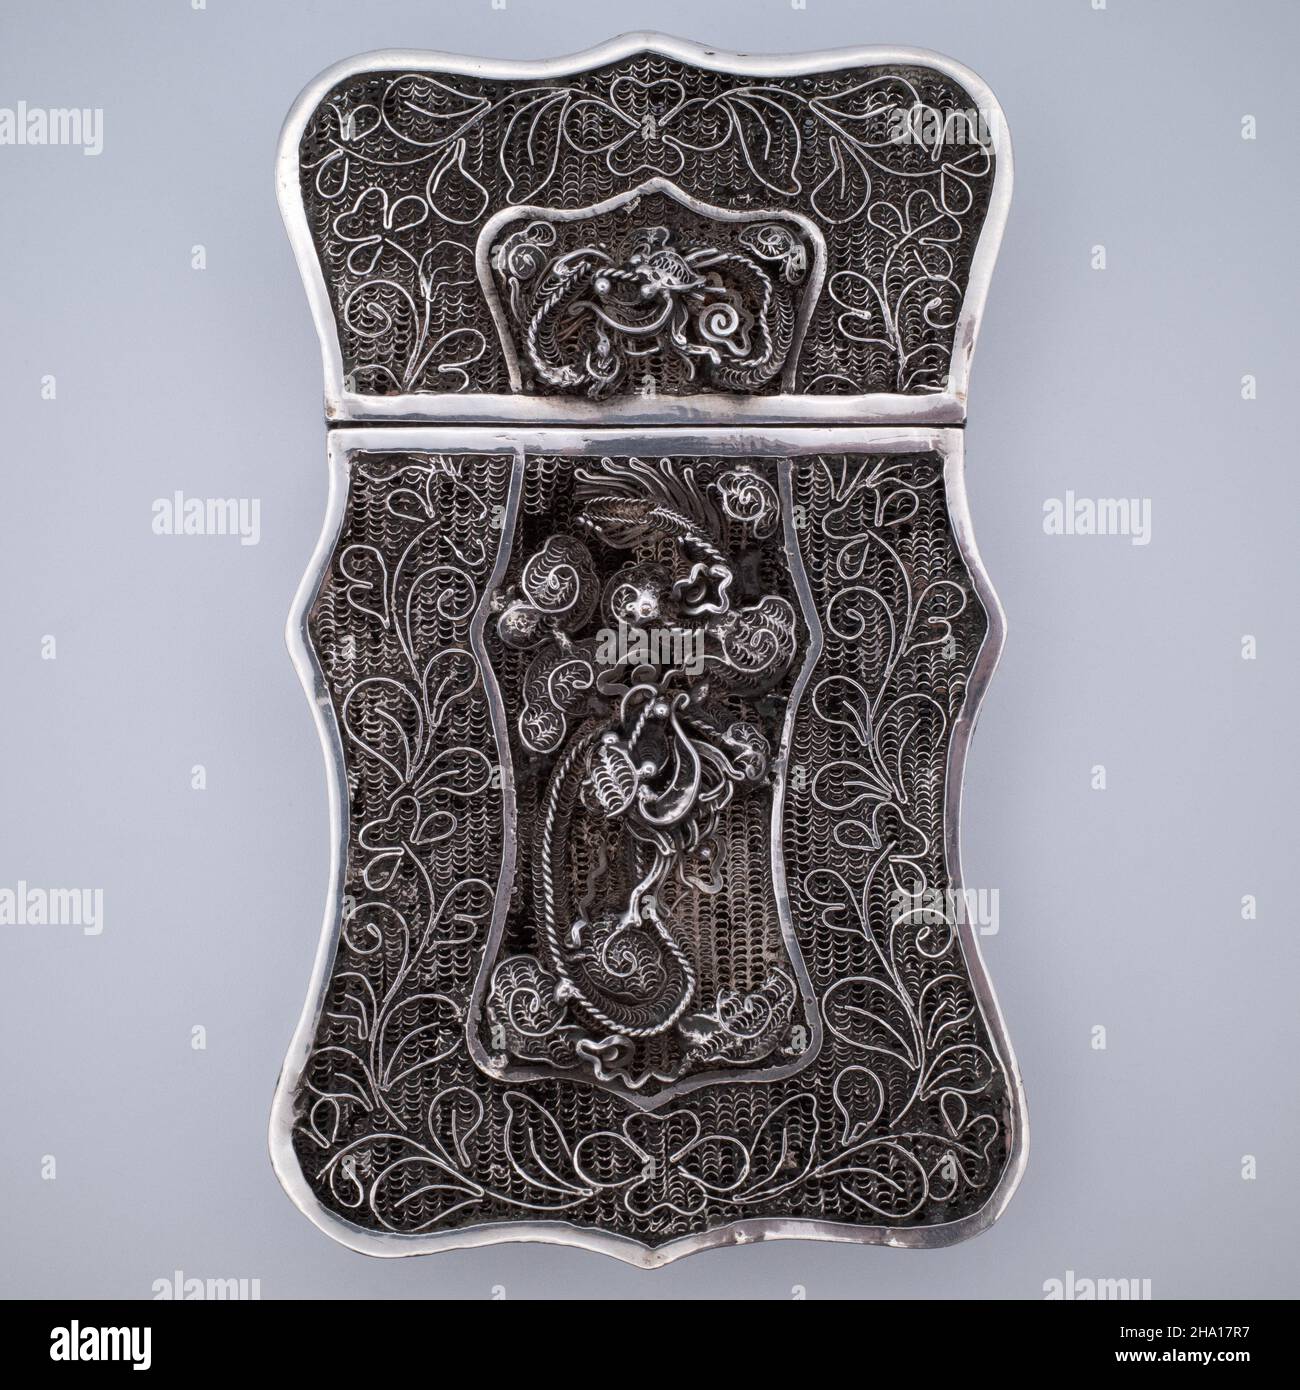 Antique Chinese Export Silver Filigree Card Case with Dragons and Flowers. 19th century Stock Photo